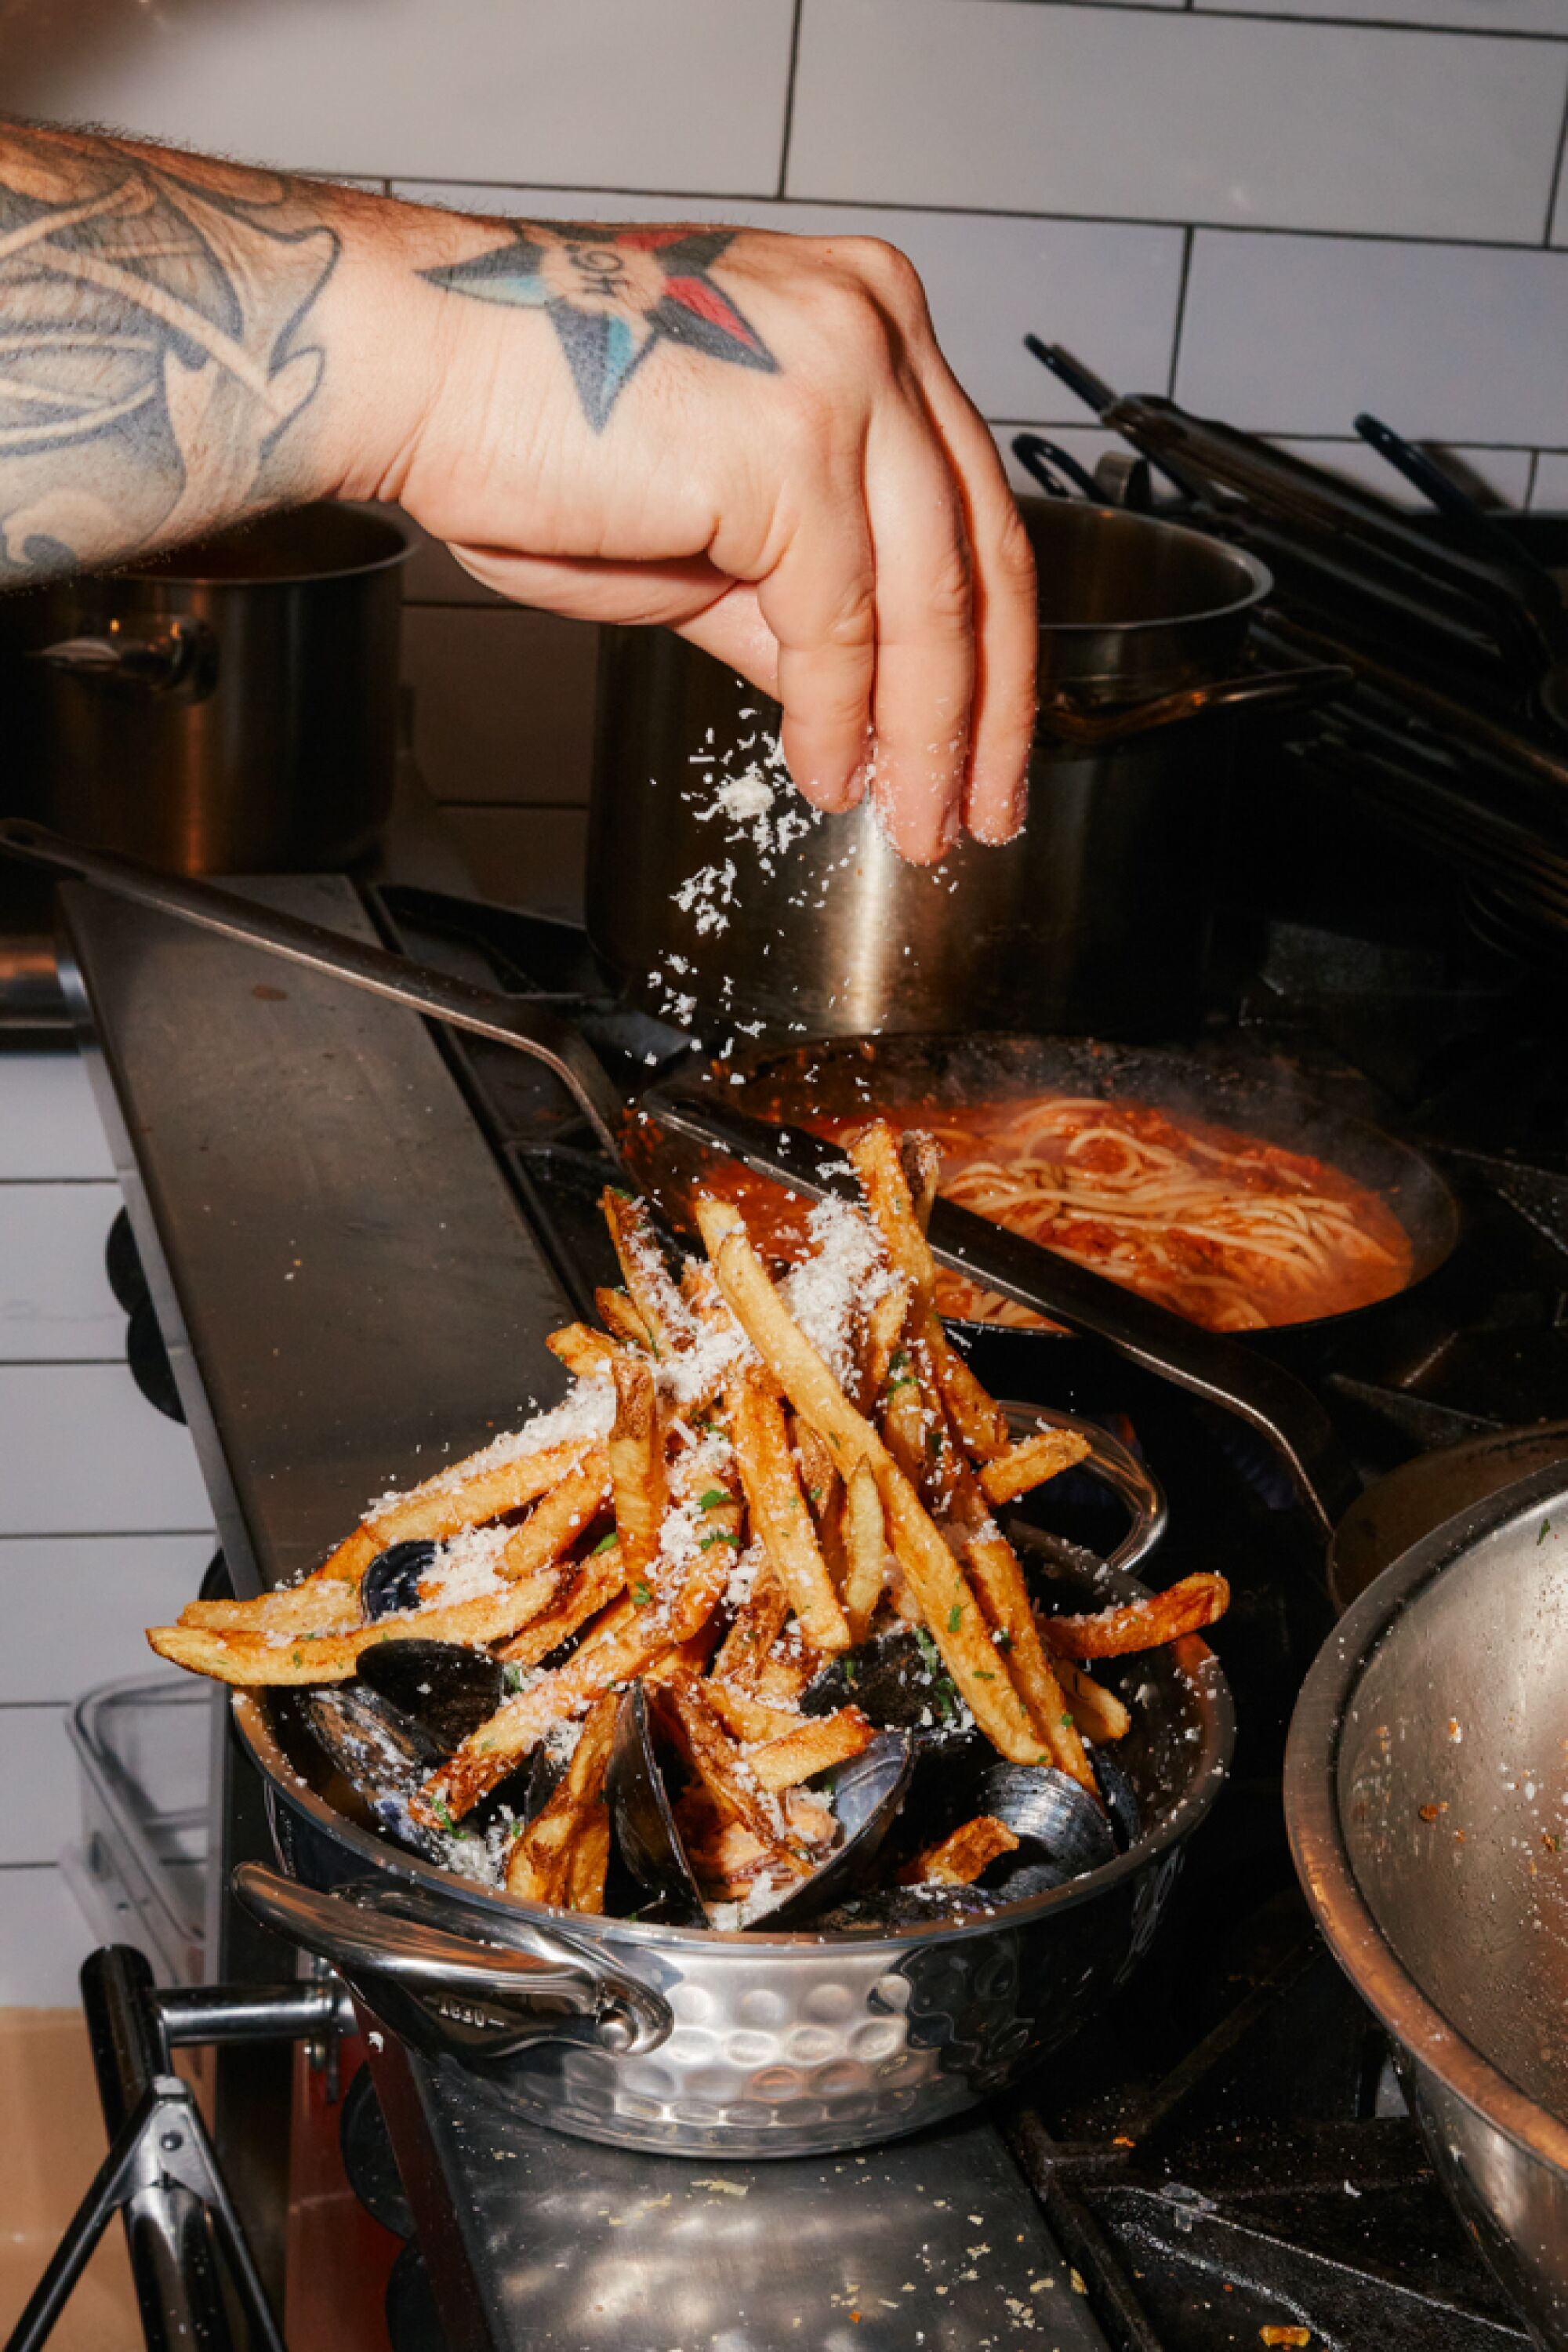 A tattooed hand sprinkles cheese over moules frites